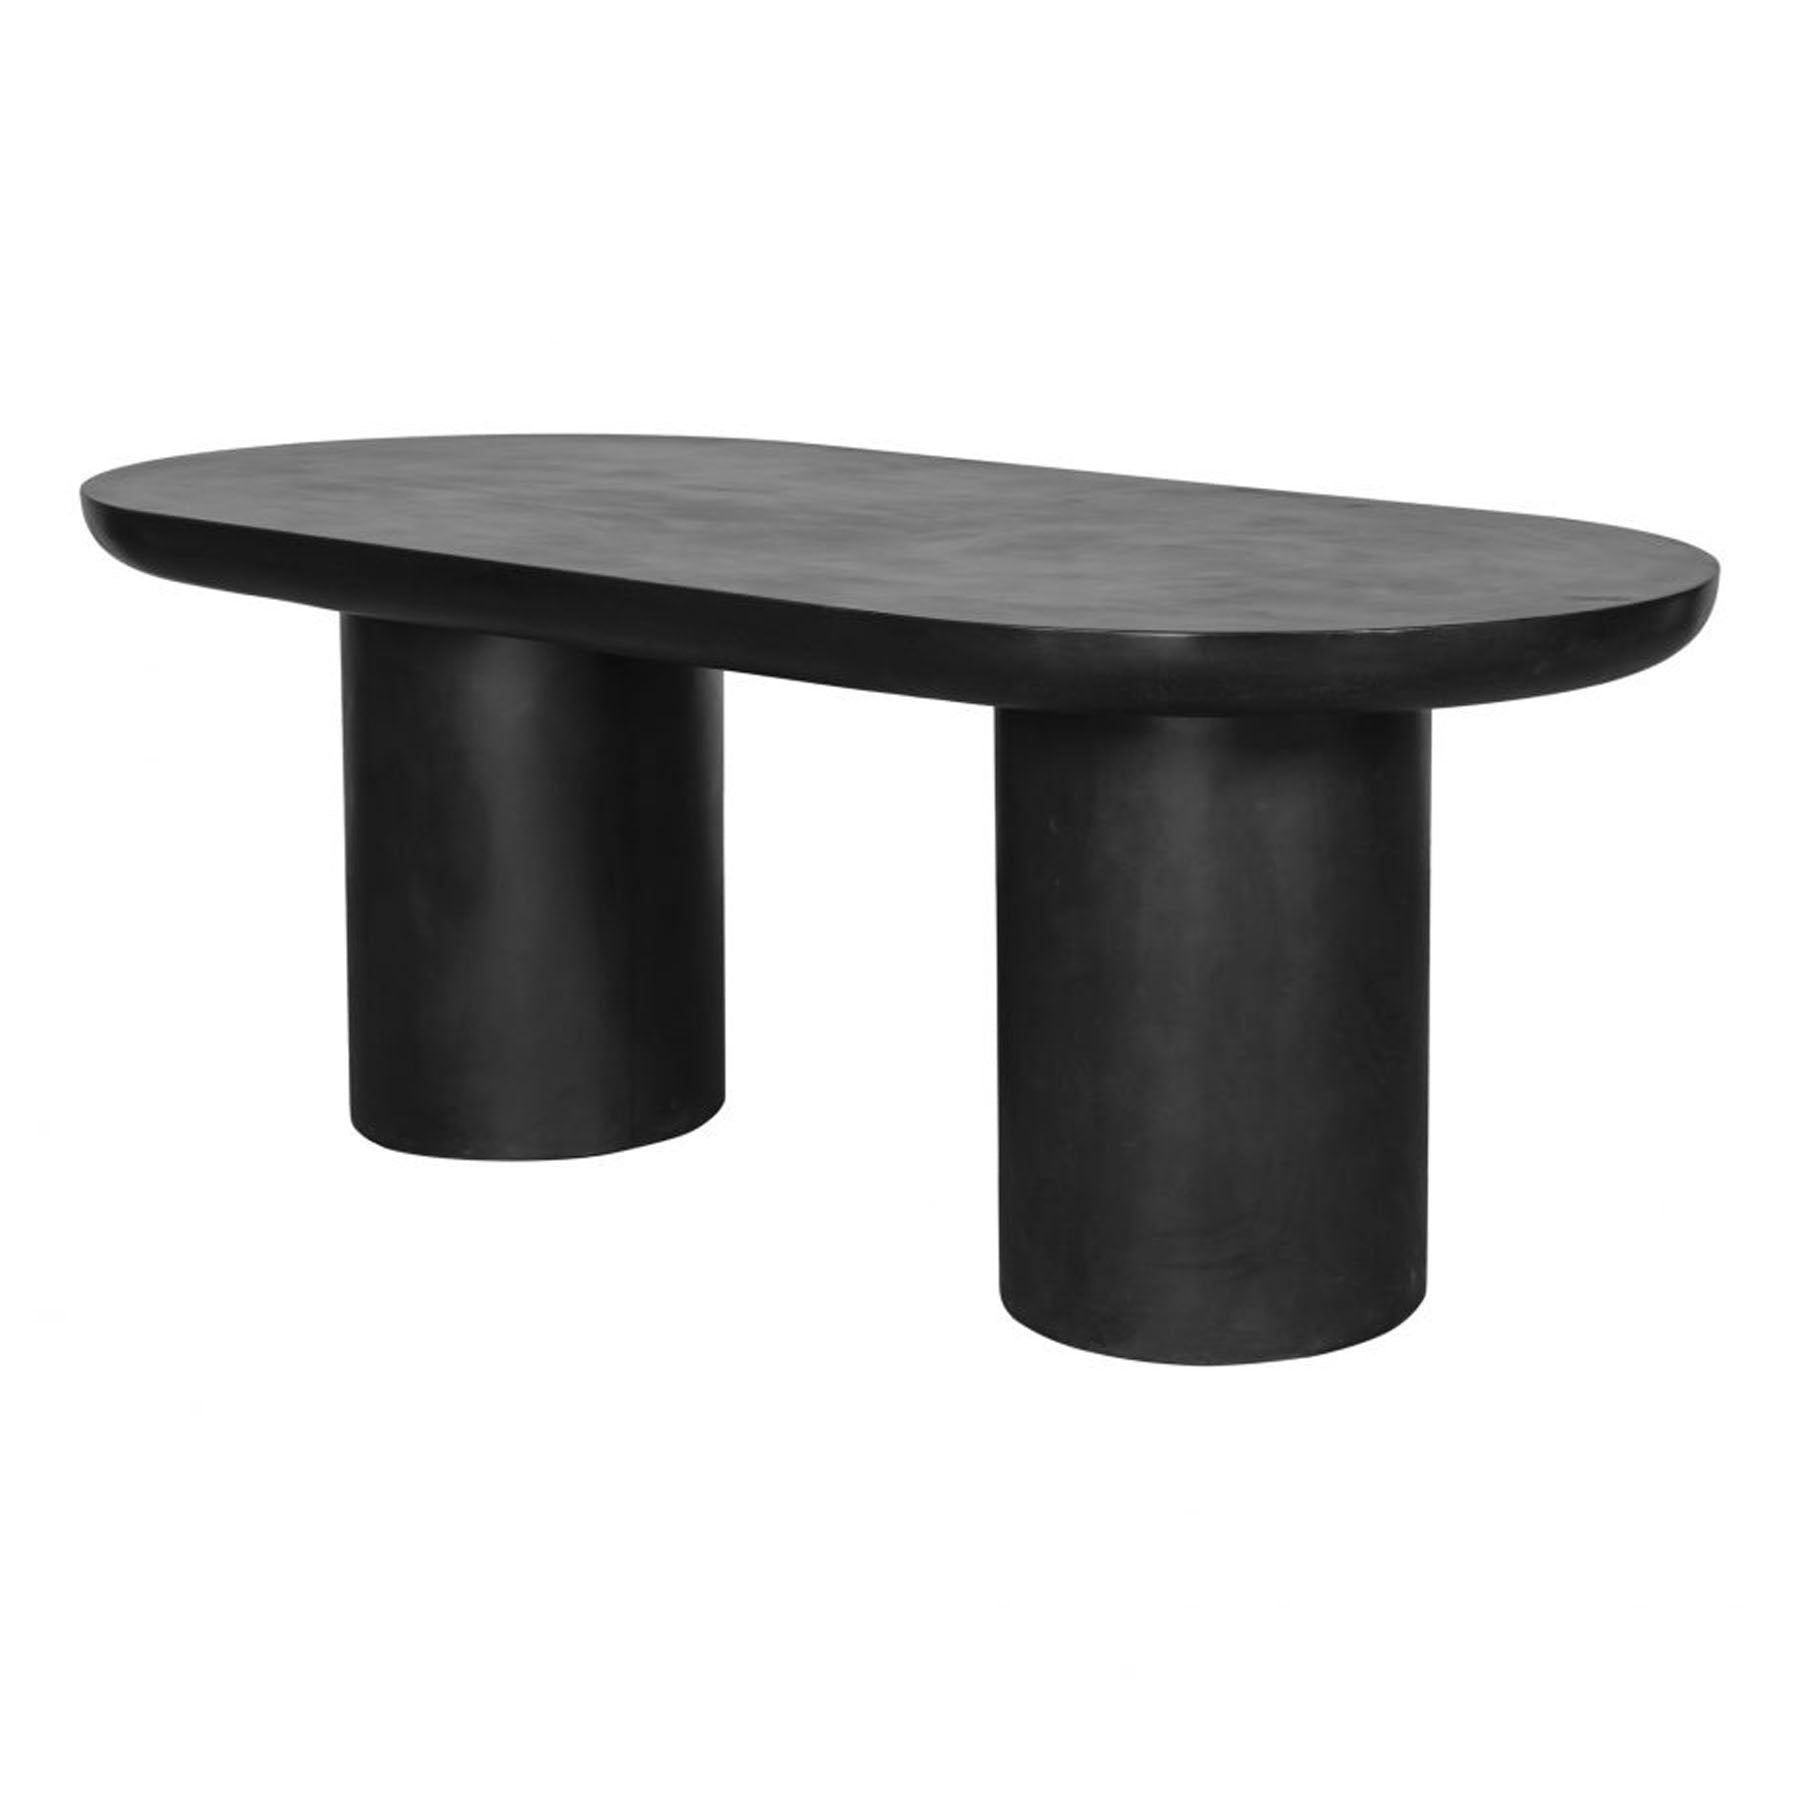 Oval concrete table with iron frame